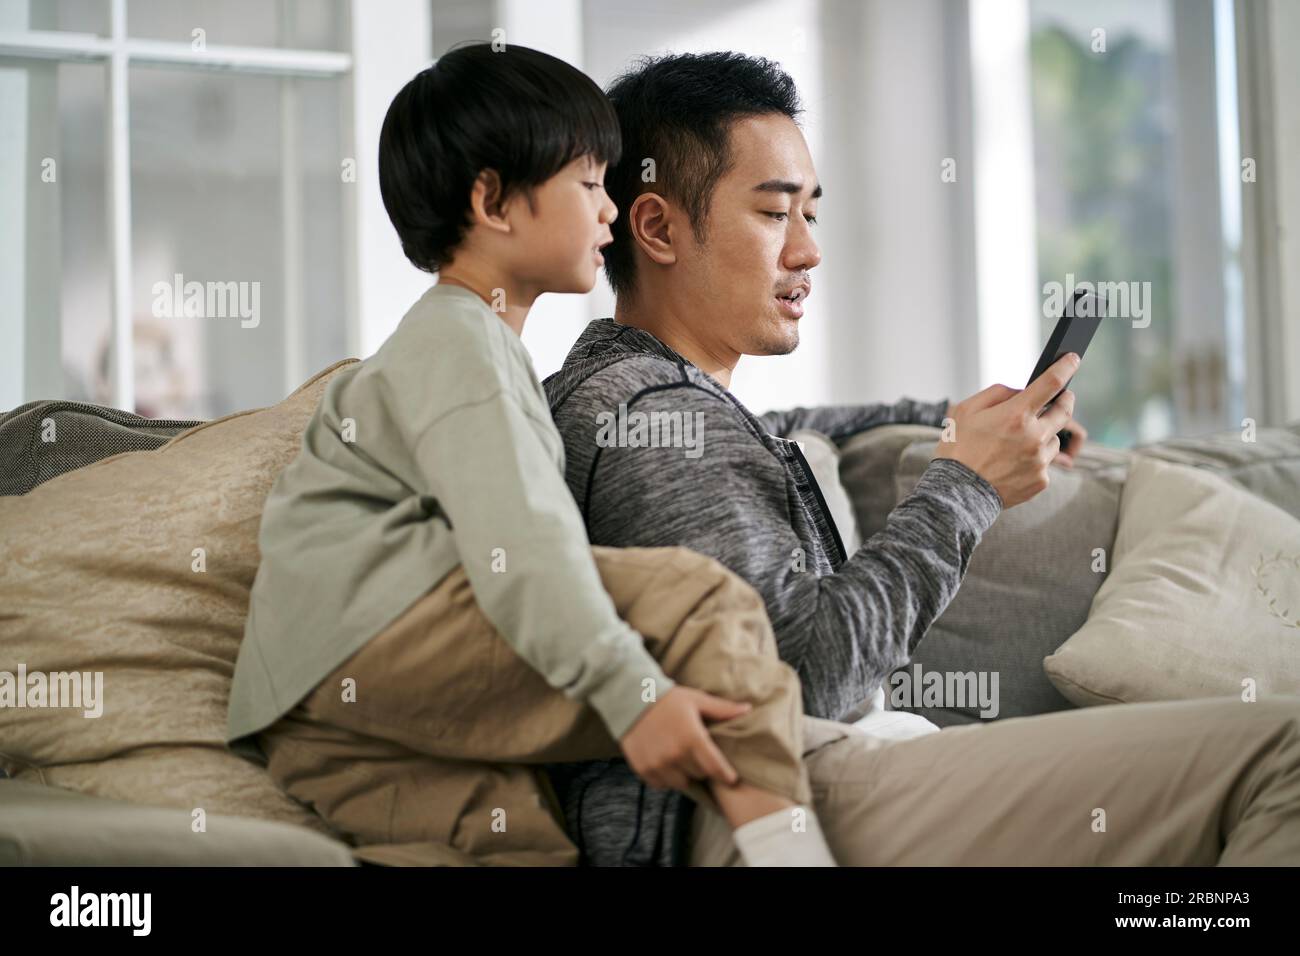 young asian father and son sitting on family couch at home looking at mobile phone together Stock Photo